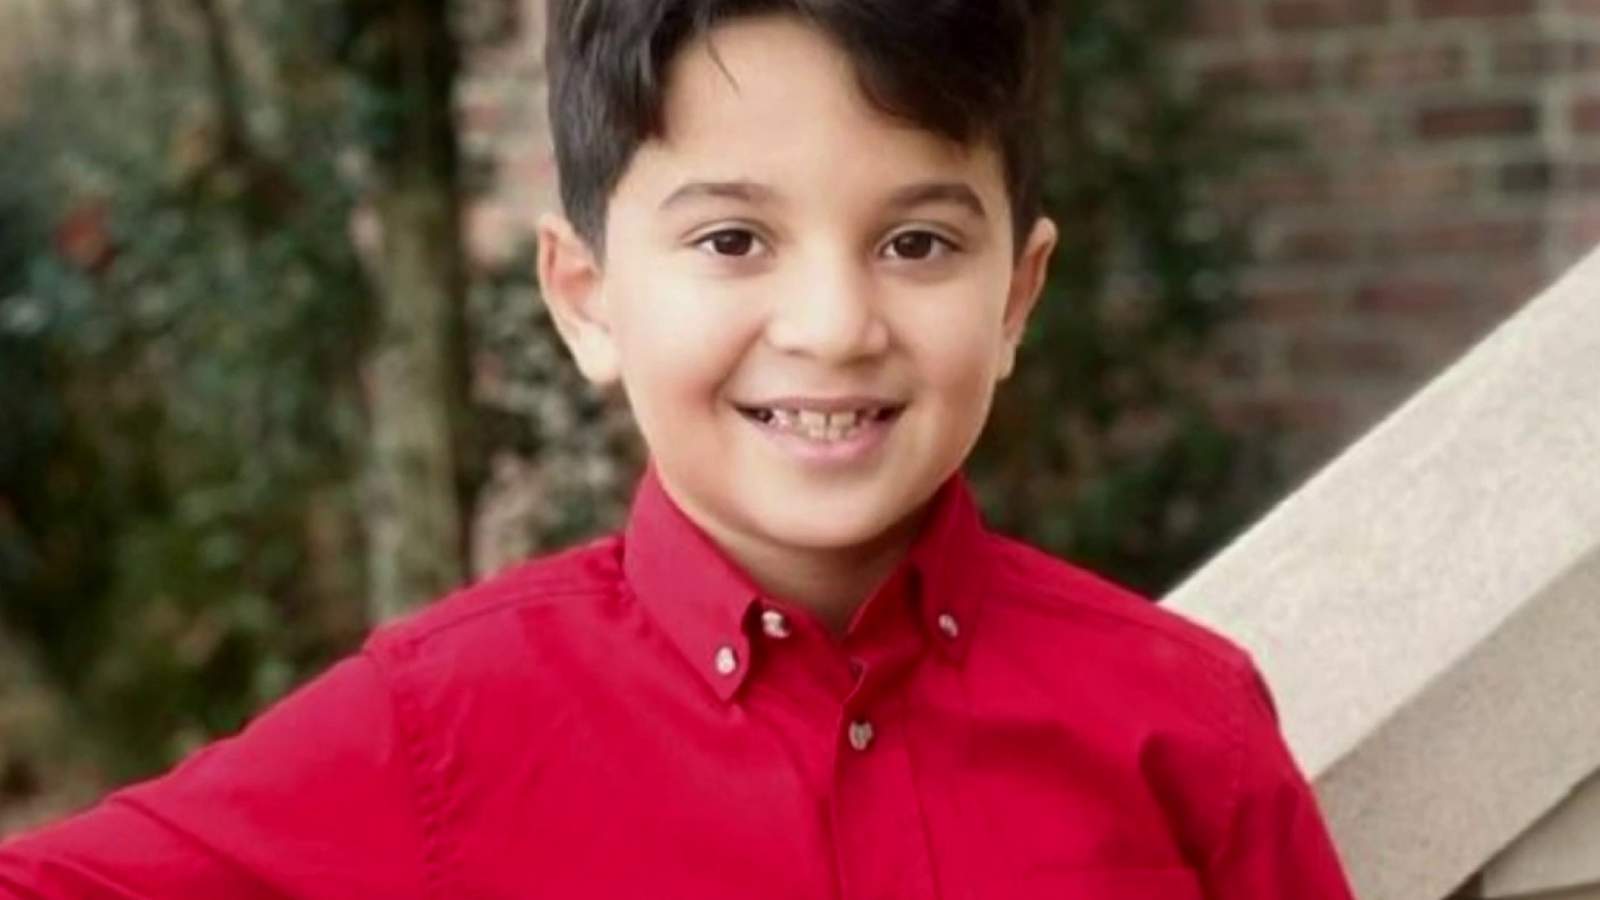 Dearborn community rallies around family after 9-year-old boy dies in sledding crash